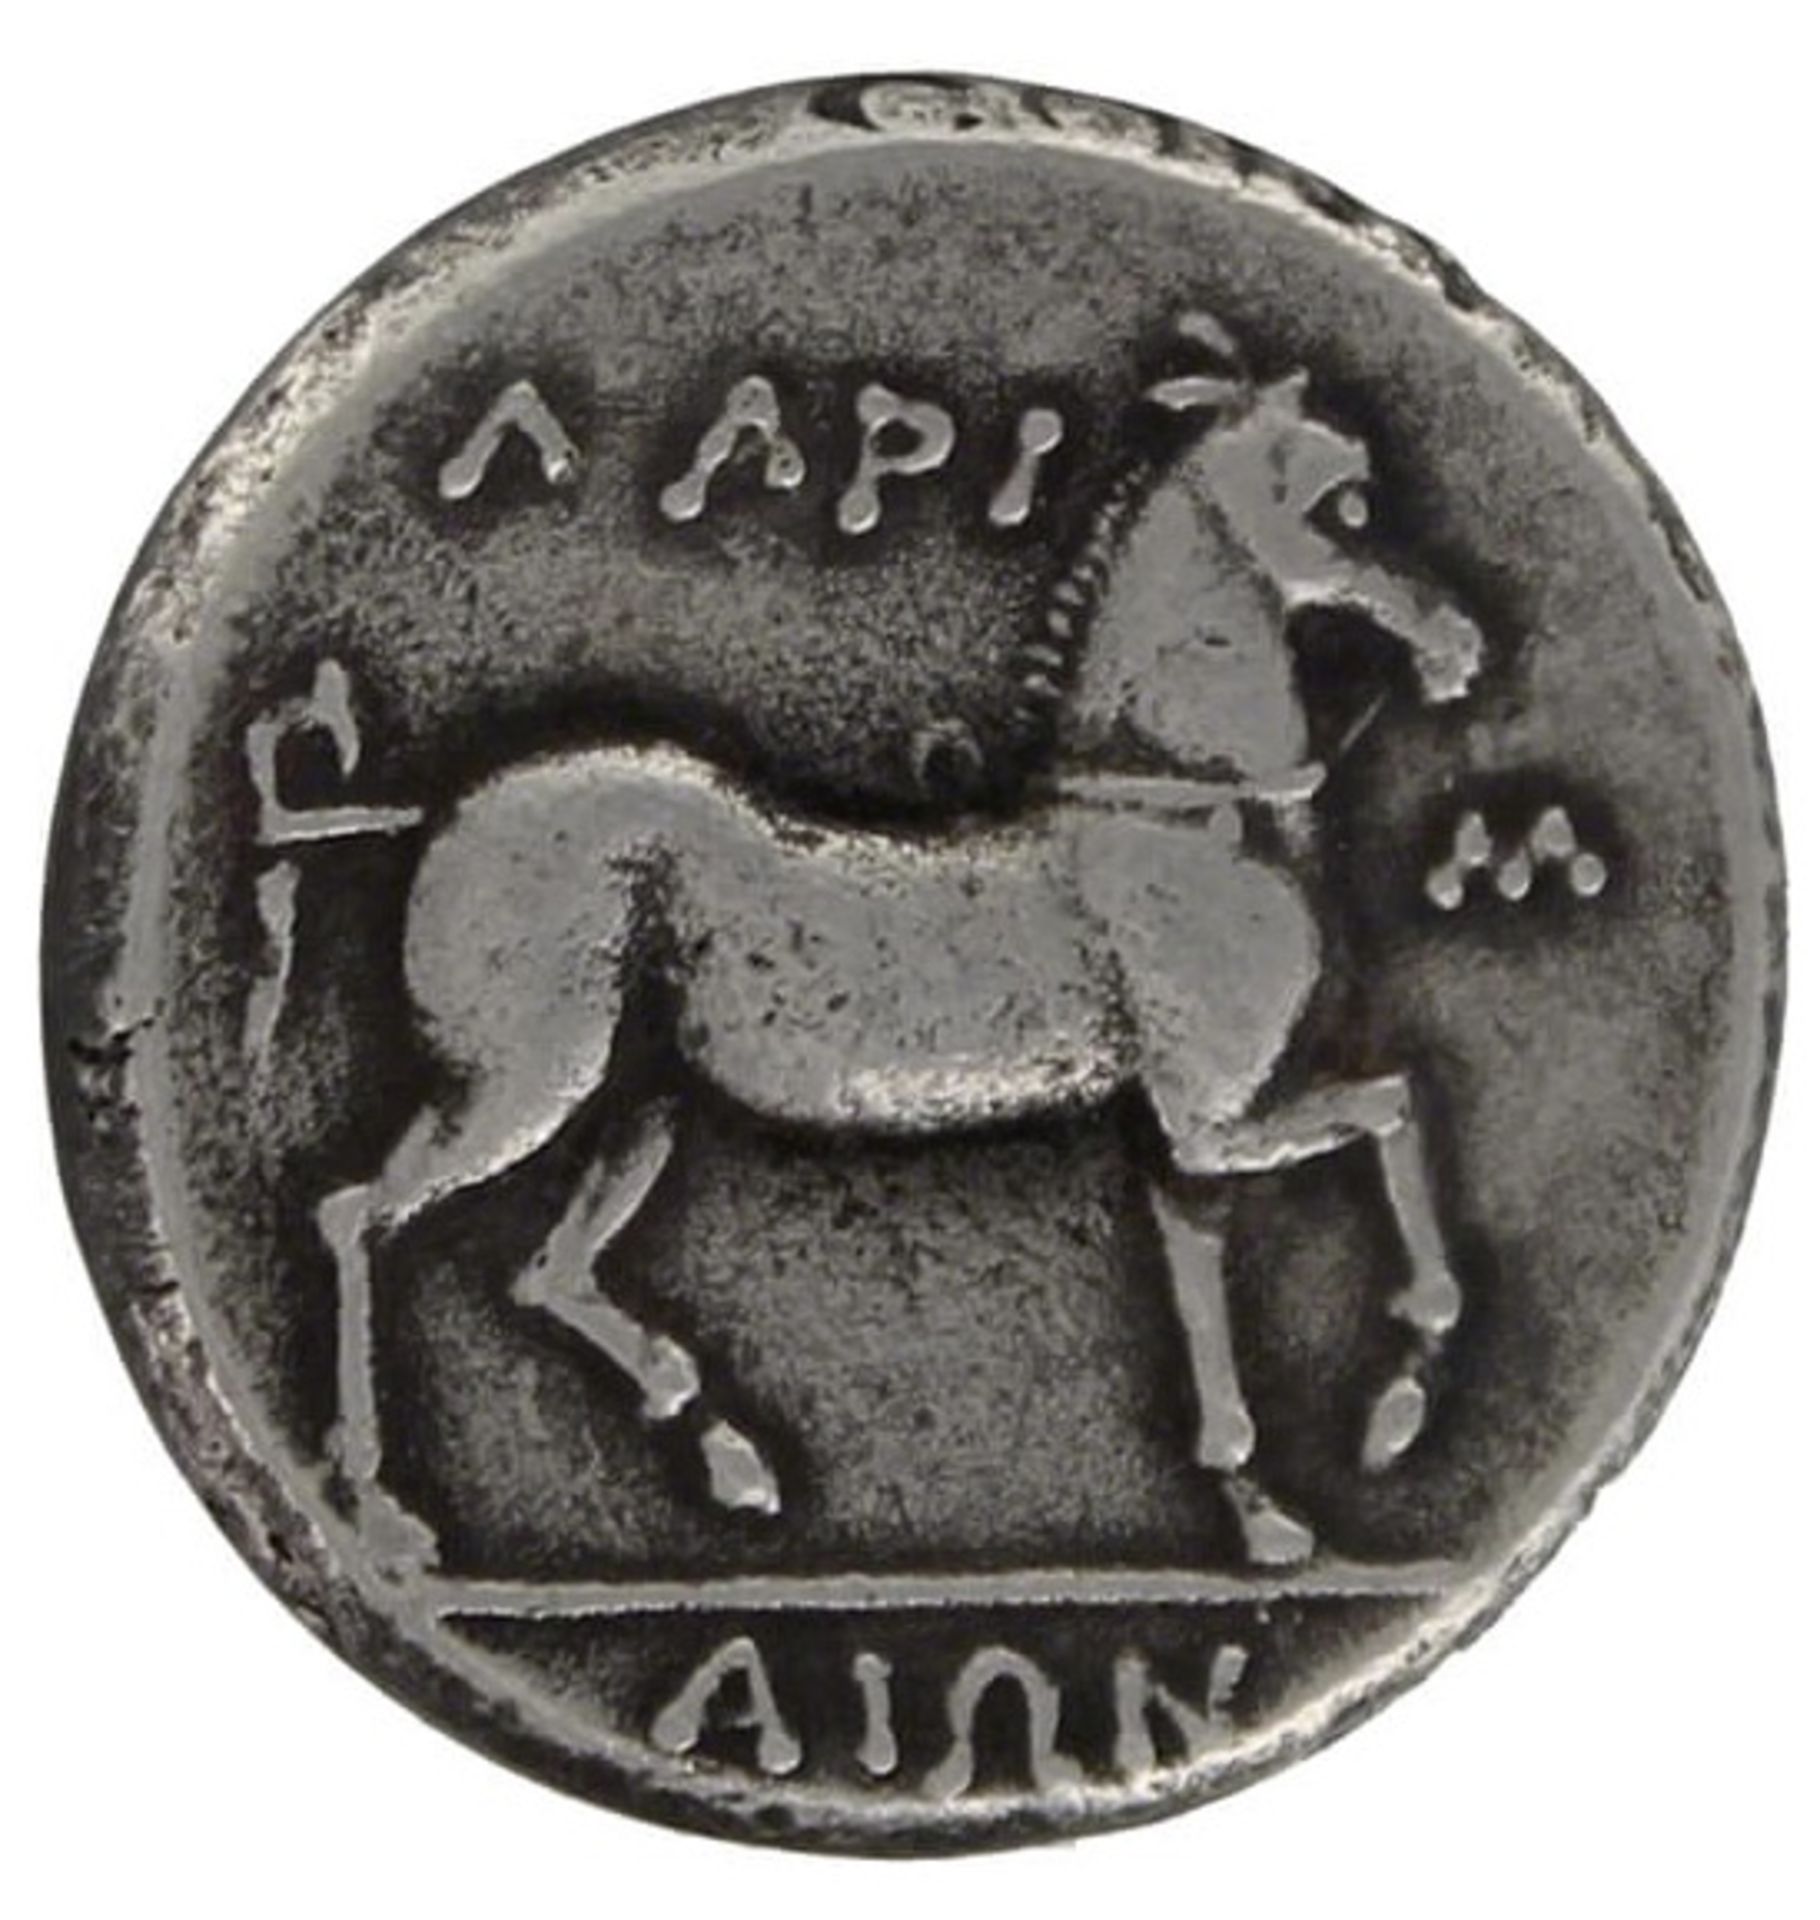 Thessaly Larissa Stater Coin - Image 2 of 2